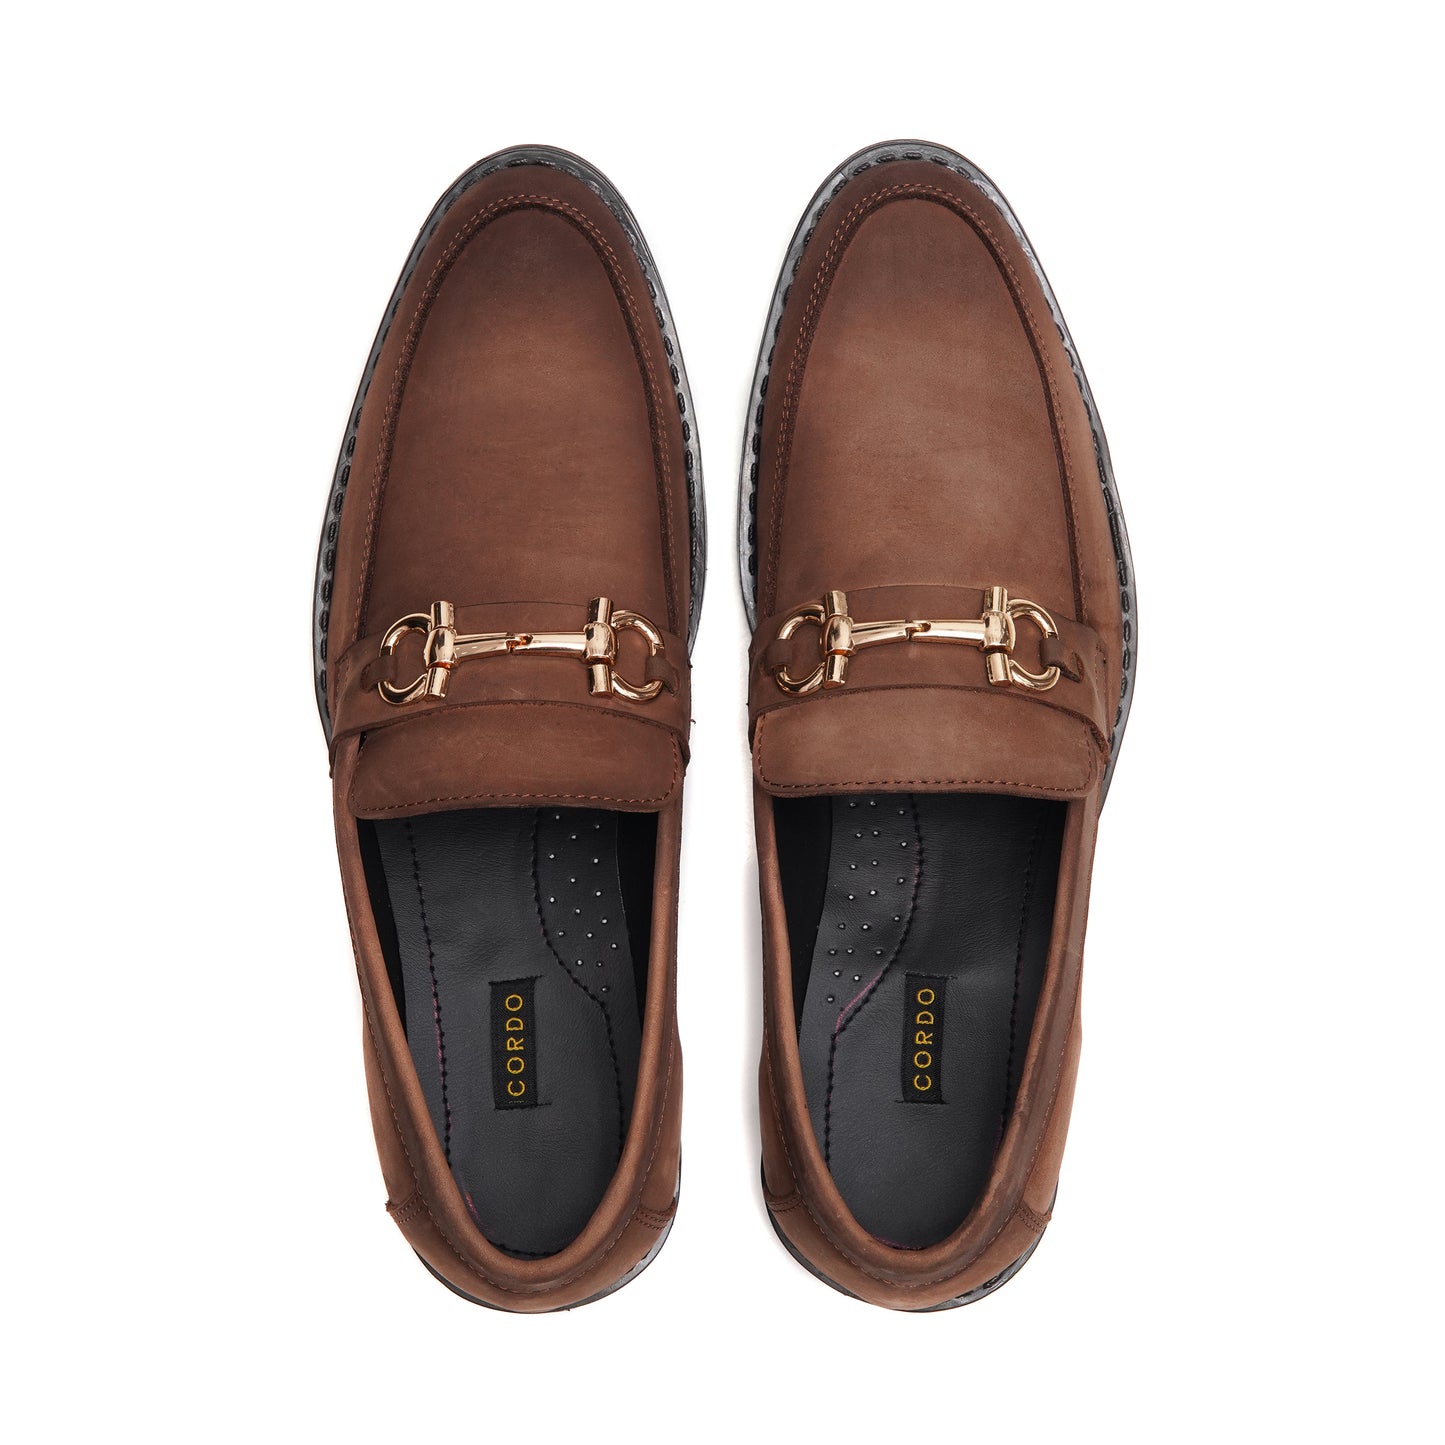 CS007- Oily Brown Shaded Horsebit Style Loafers